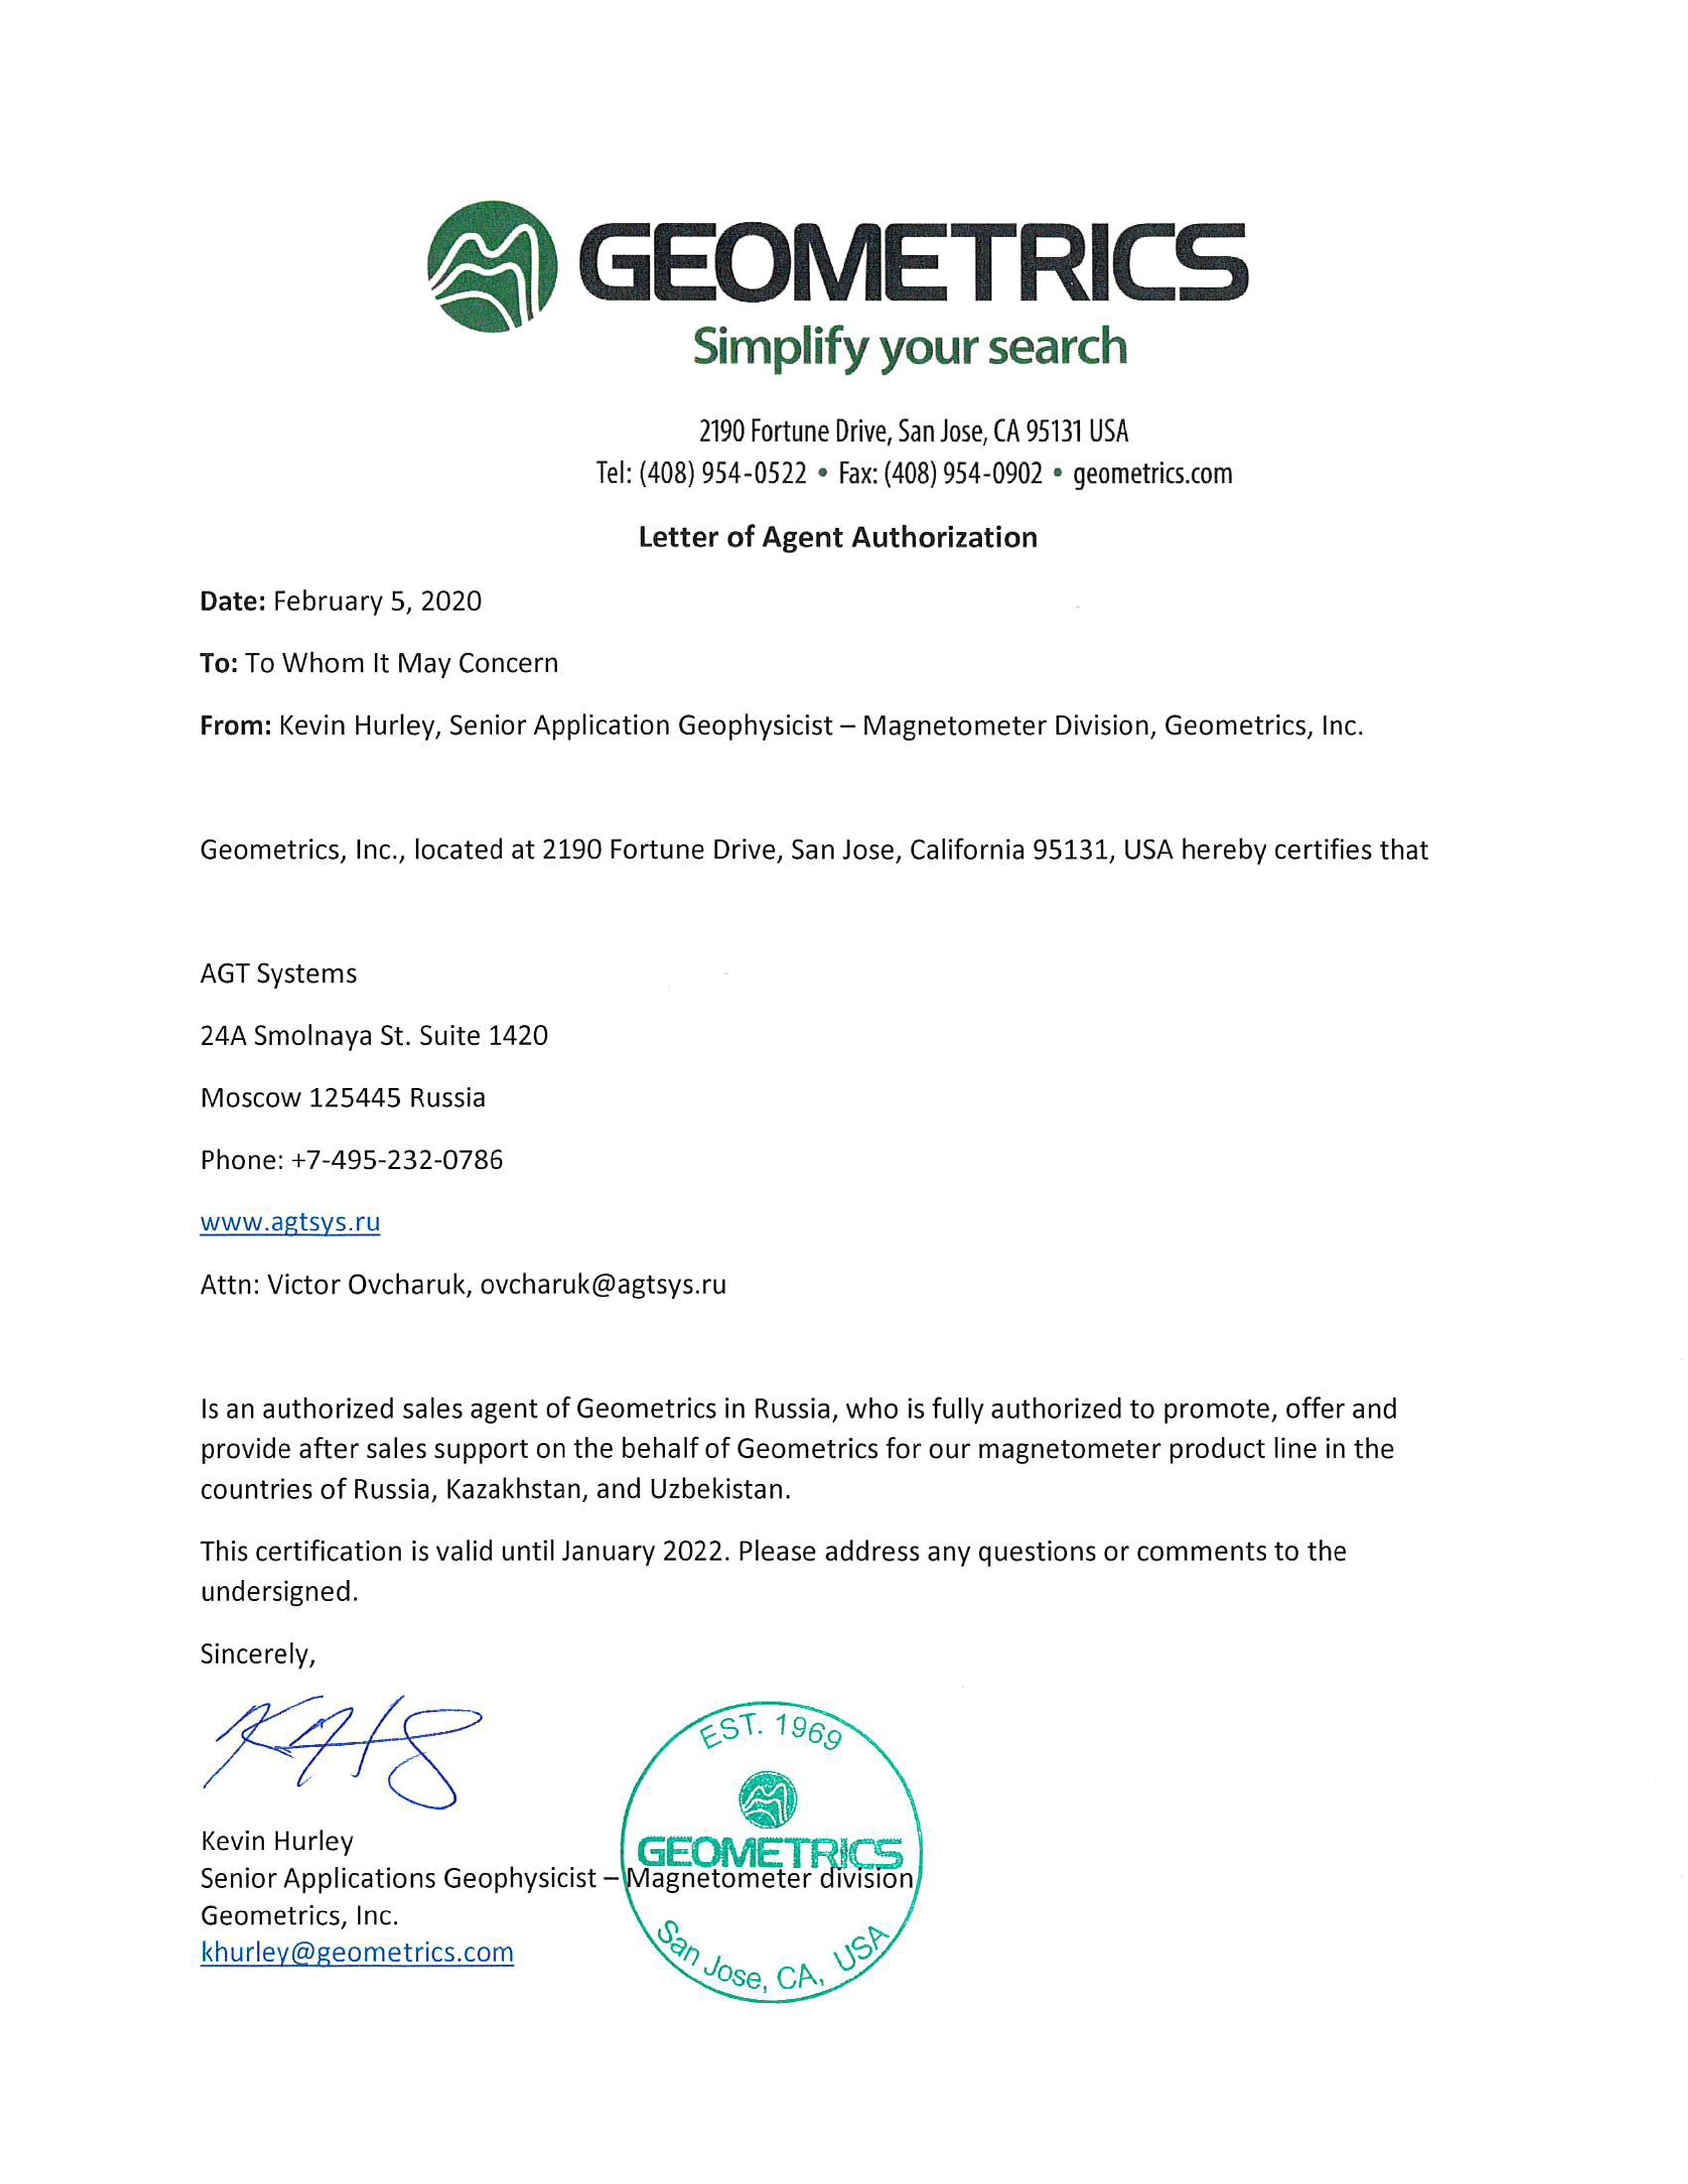 Letter of Authorization with GEOMETRICS